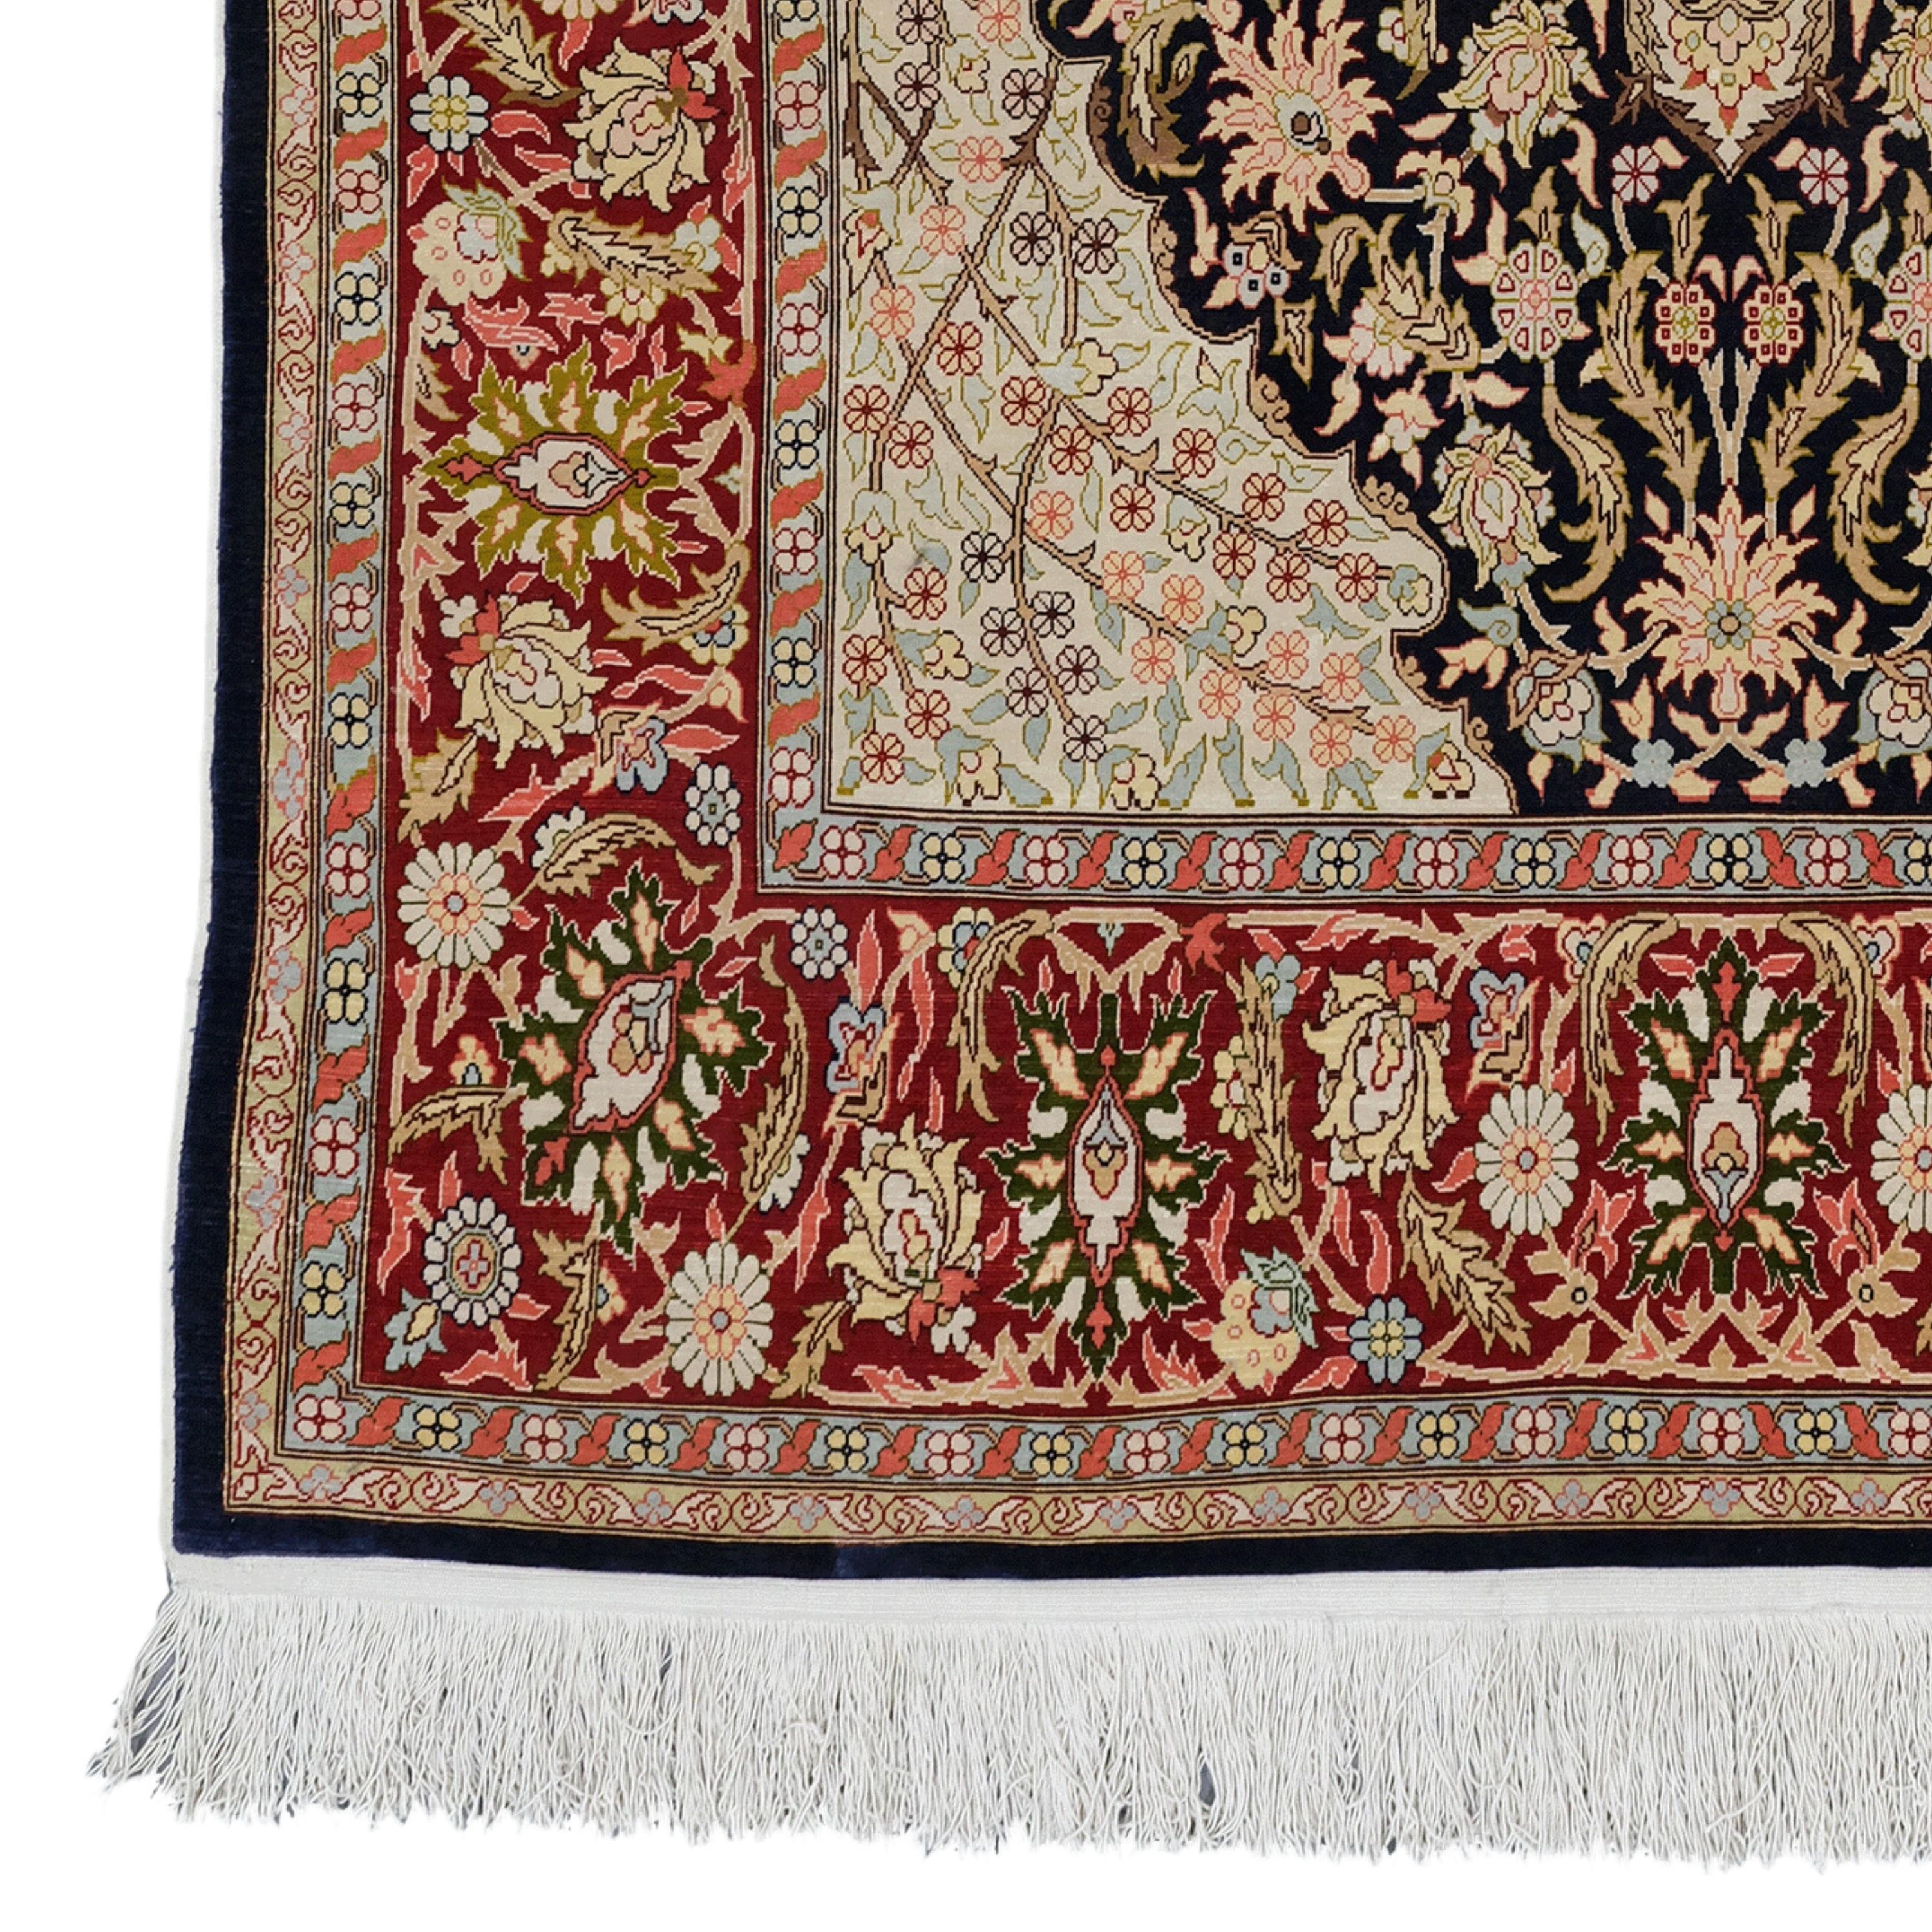 Antique Hereke Silk Rug  Antique Silk Rug
20th Century Turkish Silk Hereke Rug

This magnificent carpet will fascinate you with its intricate designs and vibrant colors that reflect the rich history and craftsmanship of the period. Each stitch tells